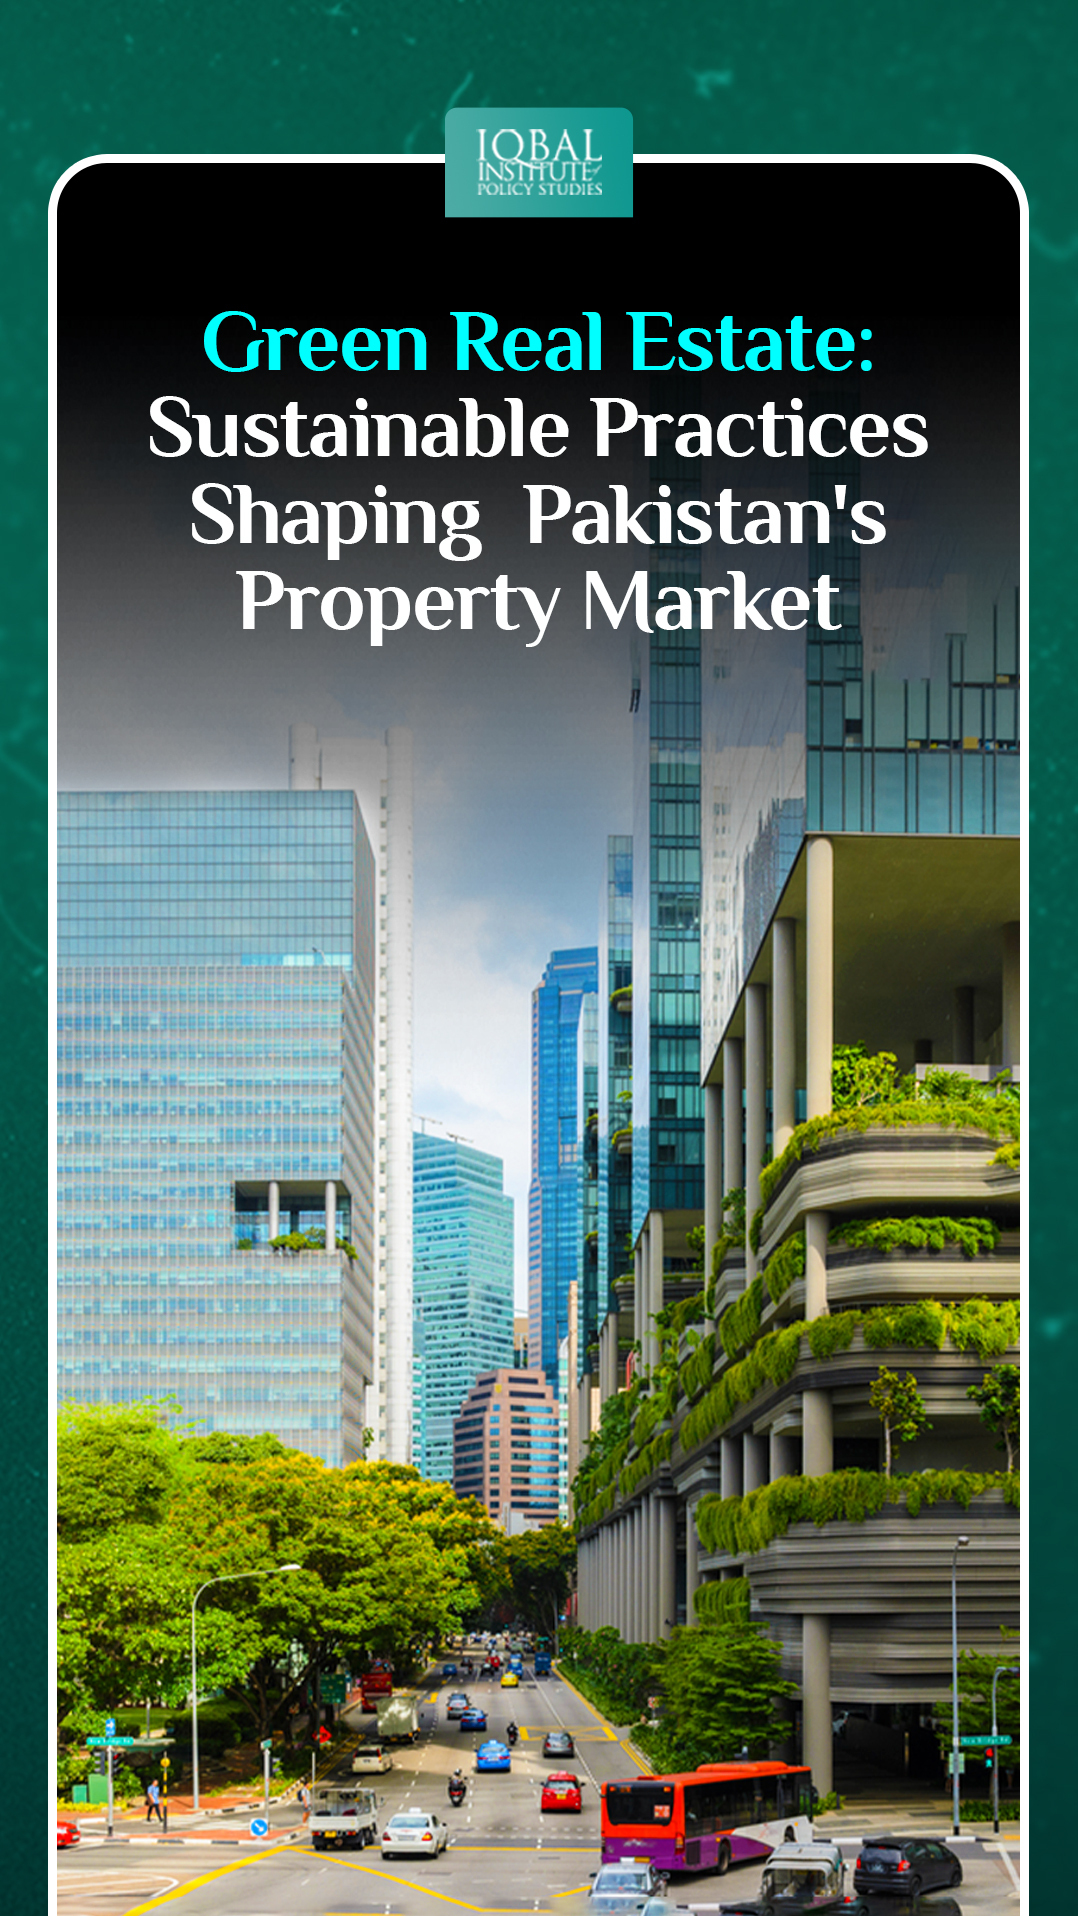 Green Real Estate: Sustainable Practices Shaping Pakistan's Property Market